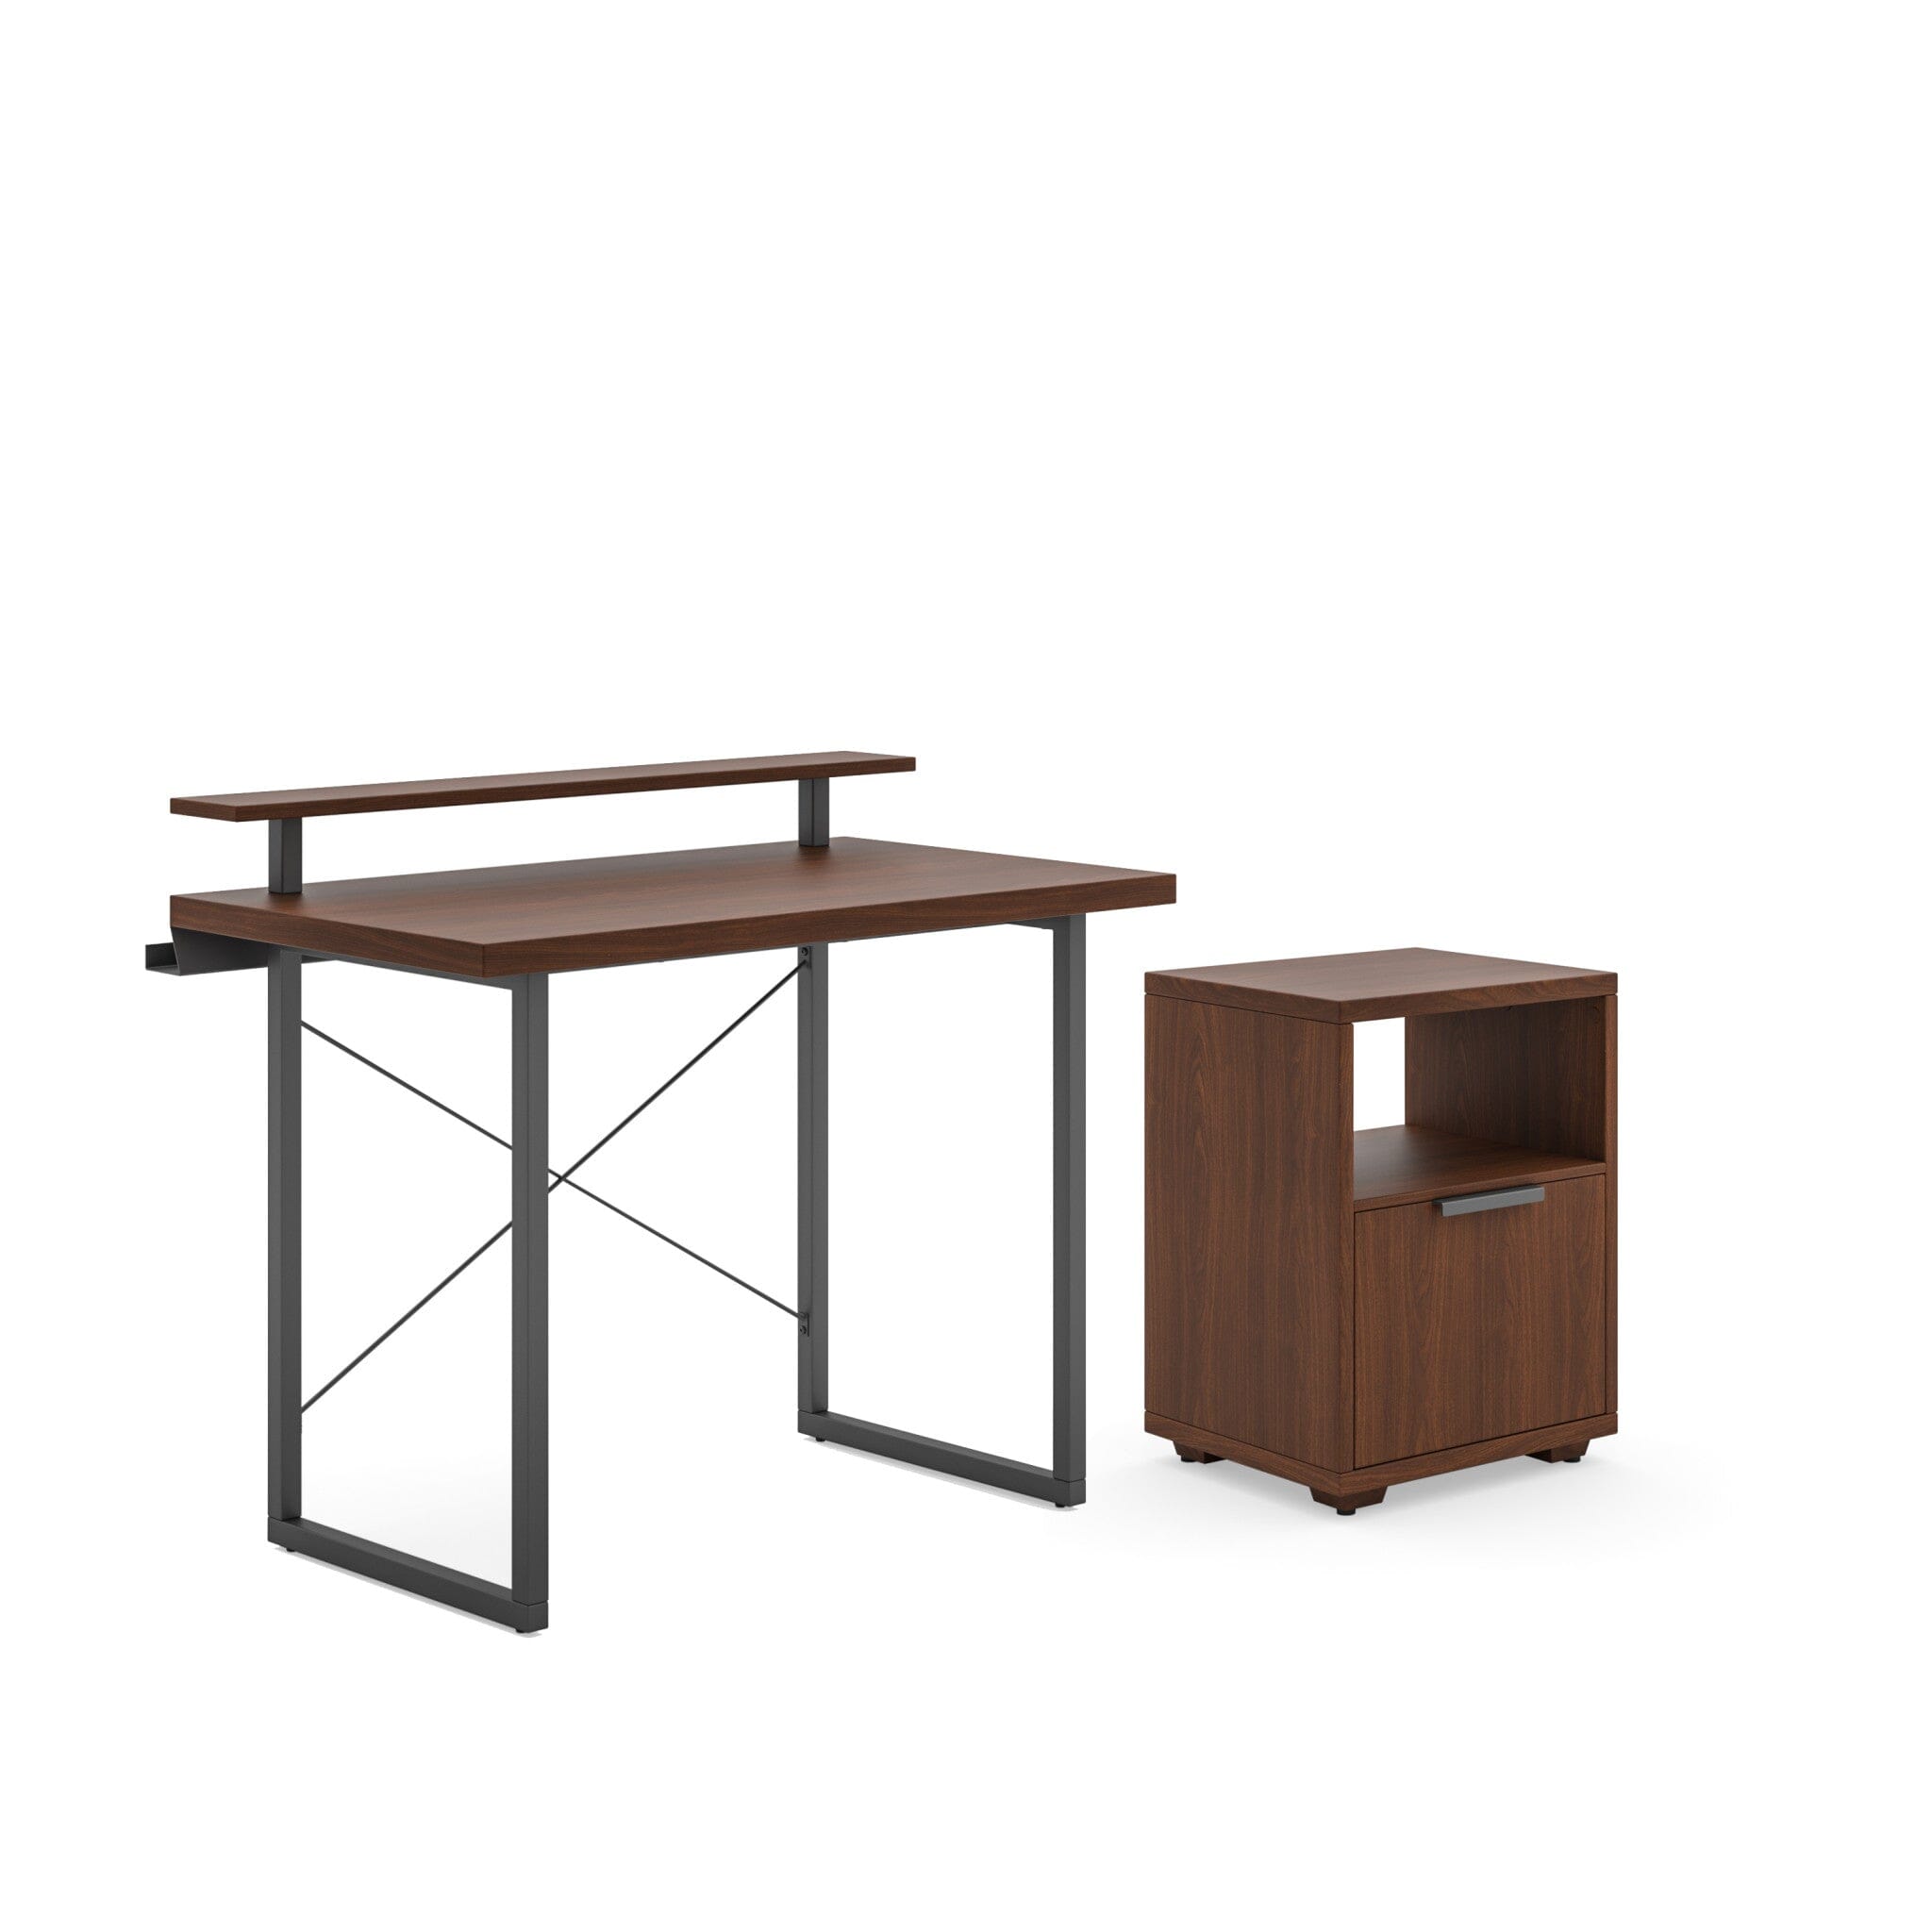 Modern & Contemporary Desk, Monitor Stand and File Cabinet By Merge Desk Merge